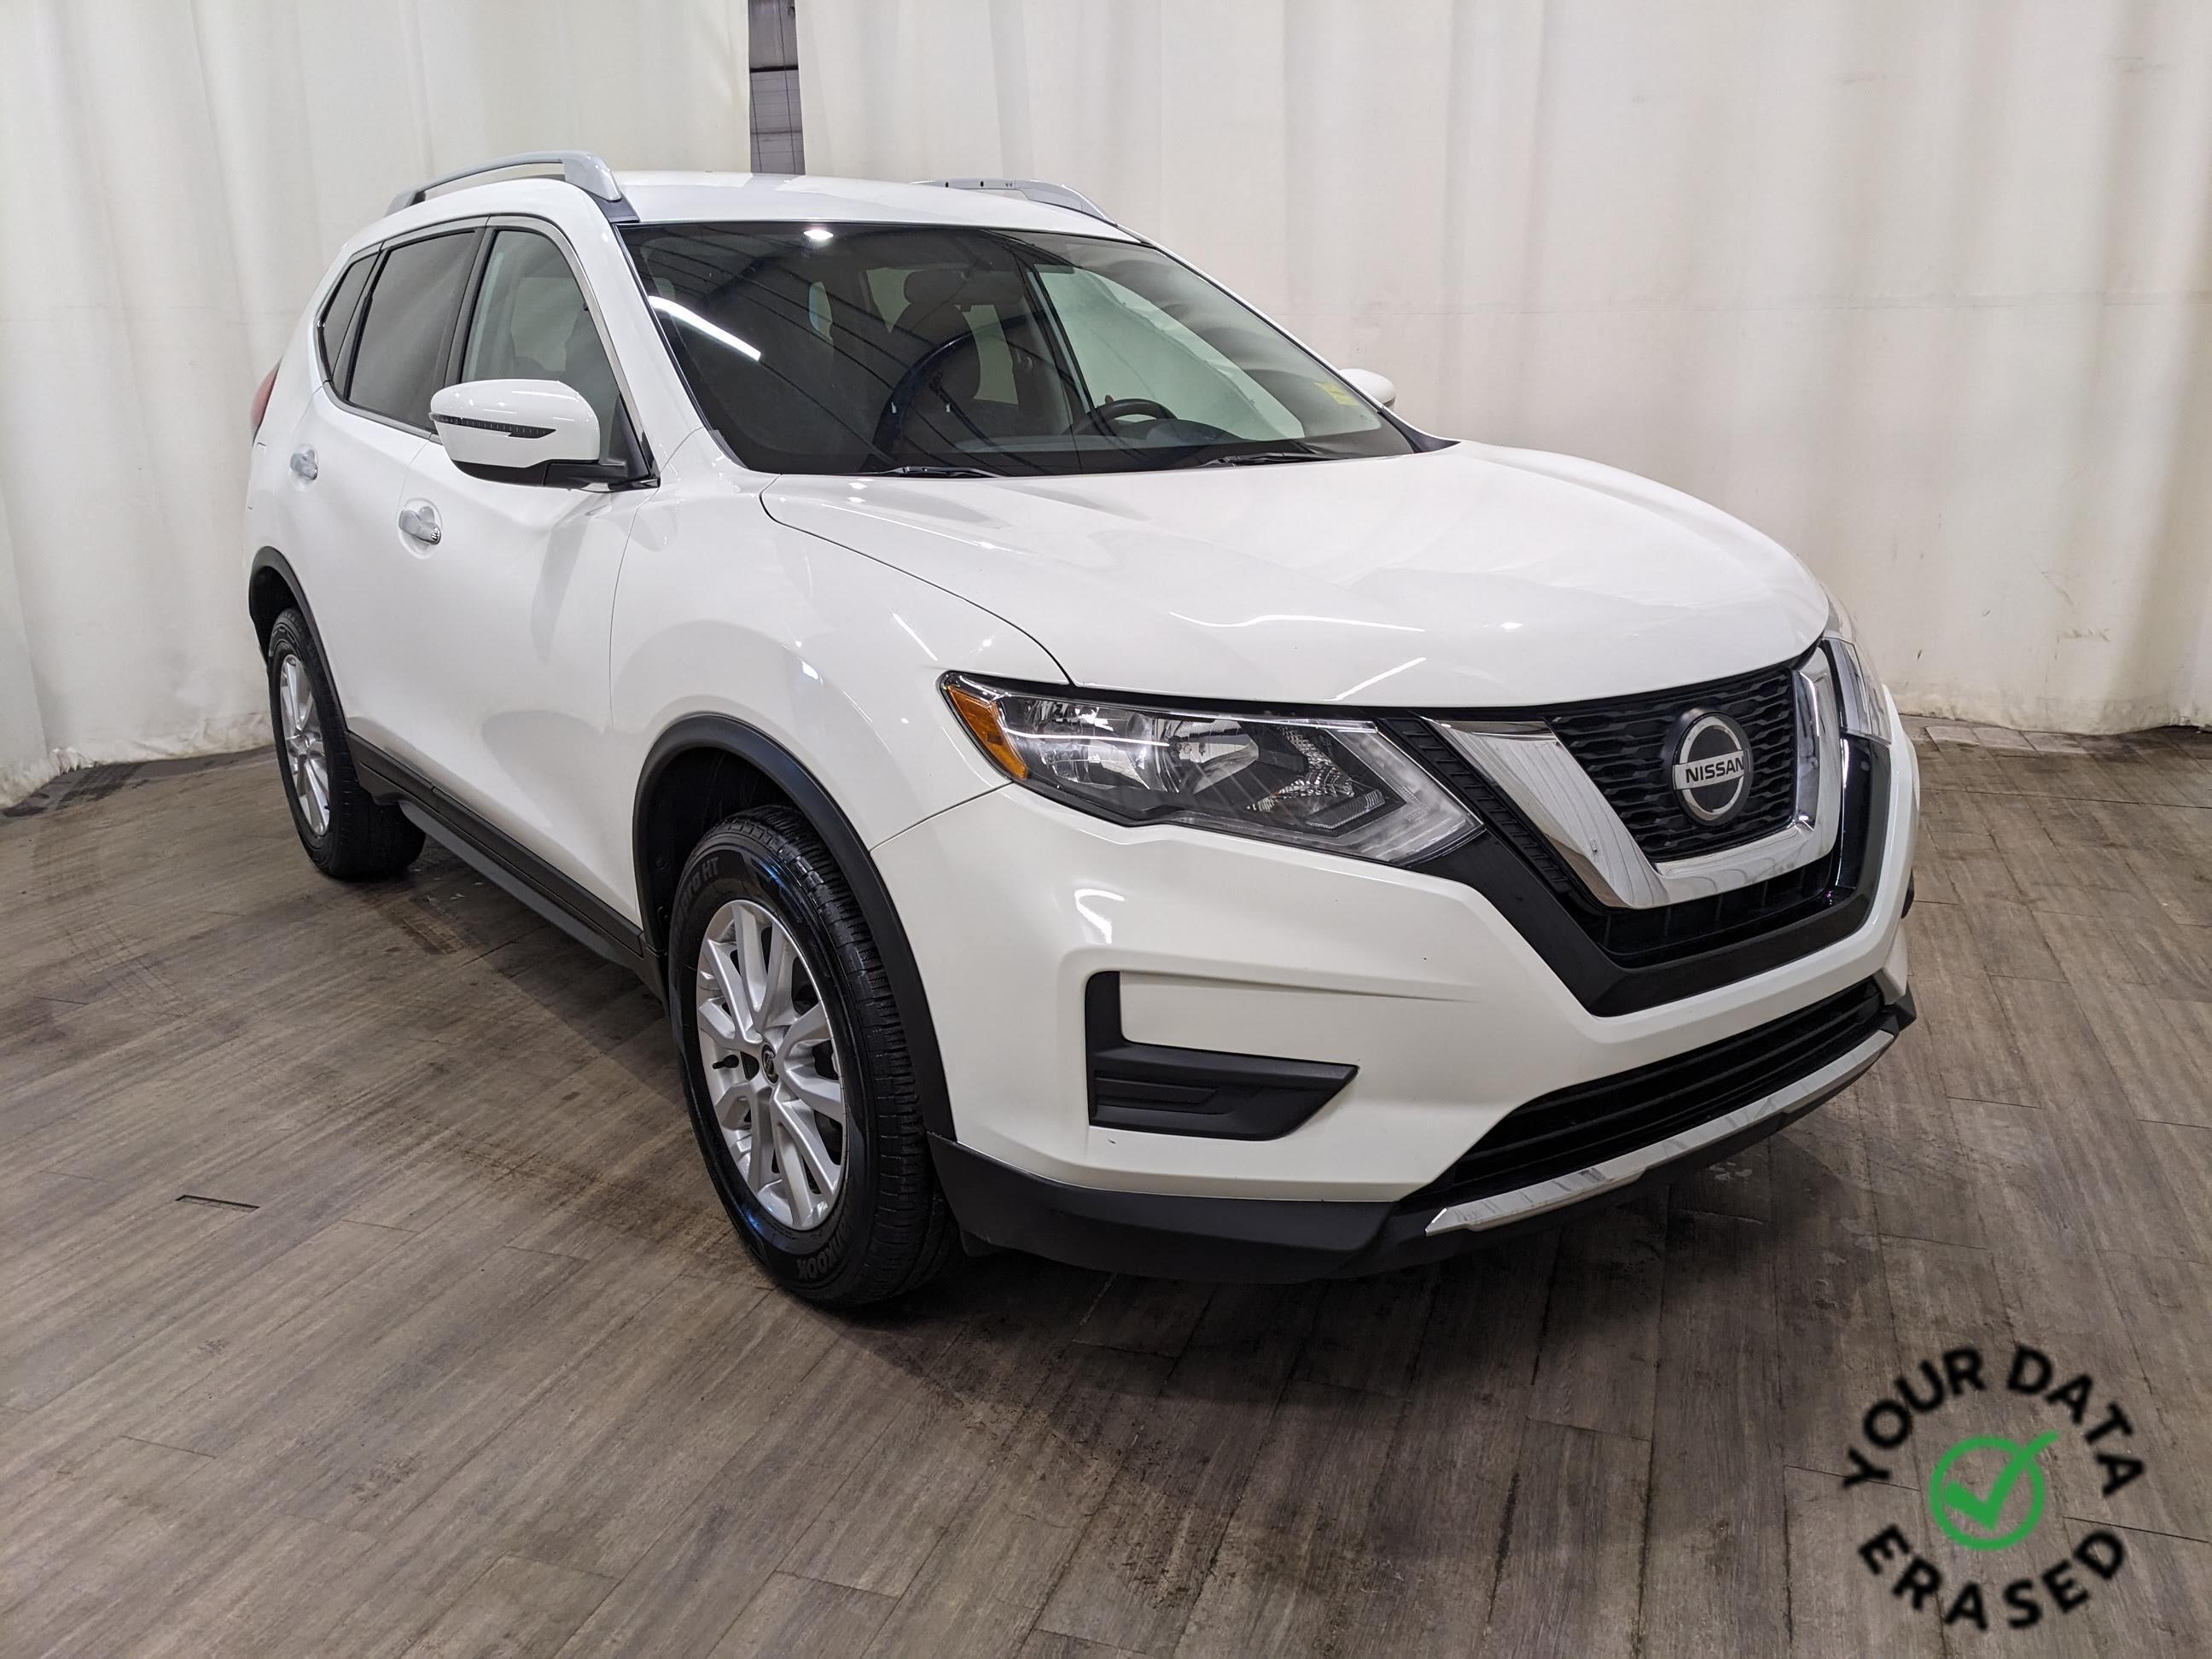 2020 Nissan Rogue SE AWD| No Accidents | Android Auto | Heated Seats